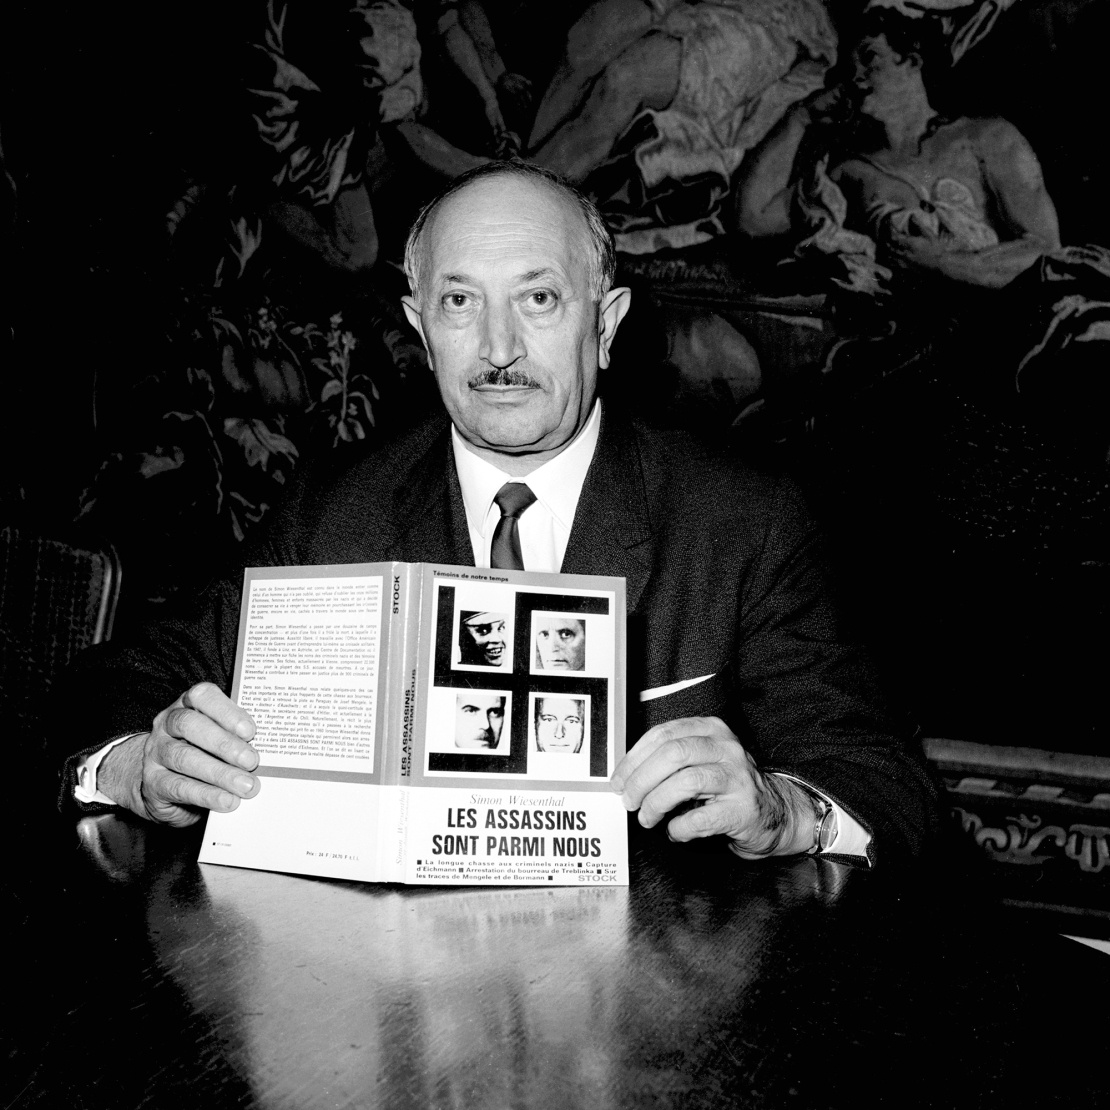 Simon Wiesenthal shows his book Murderers Among Us, October 3, 1967.